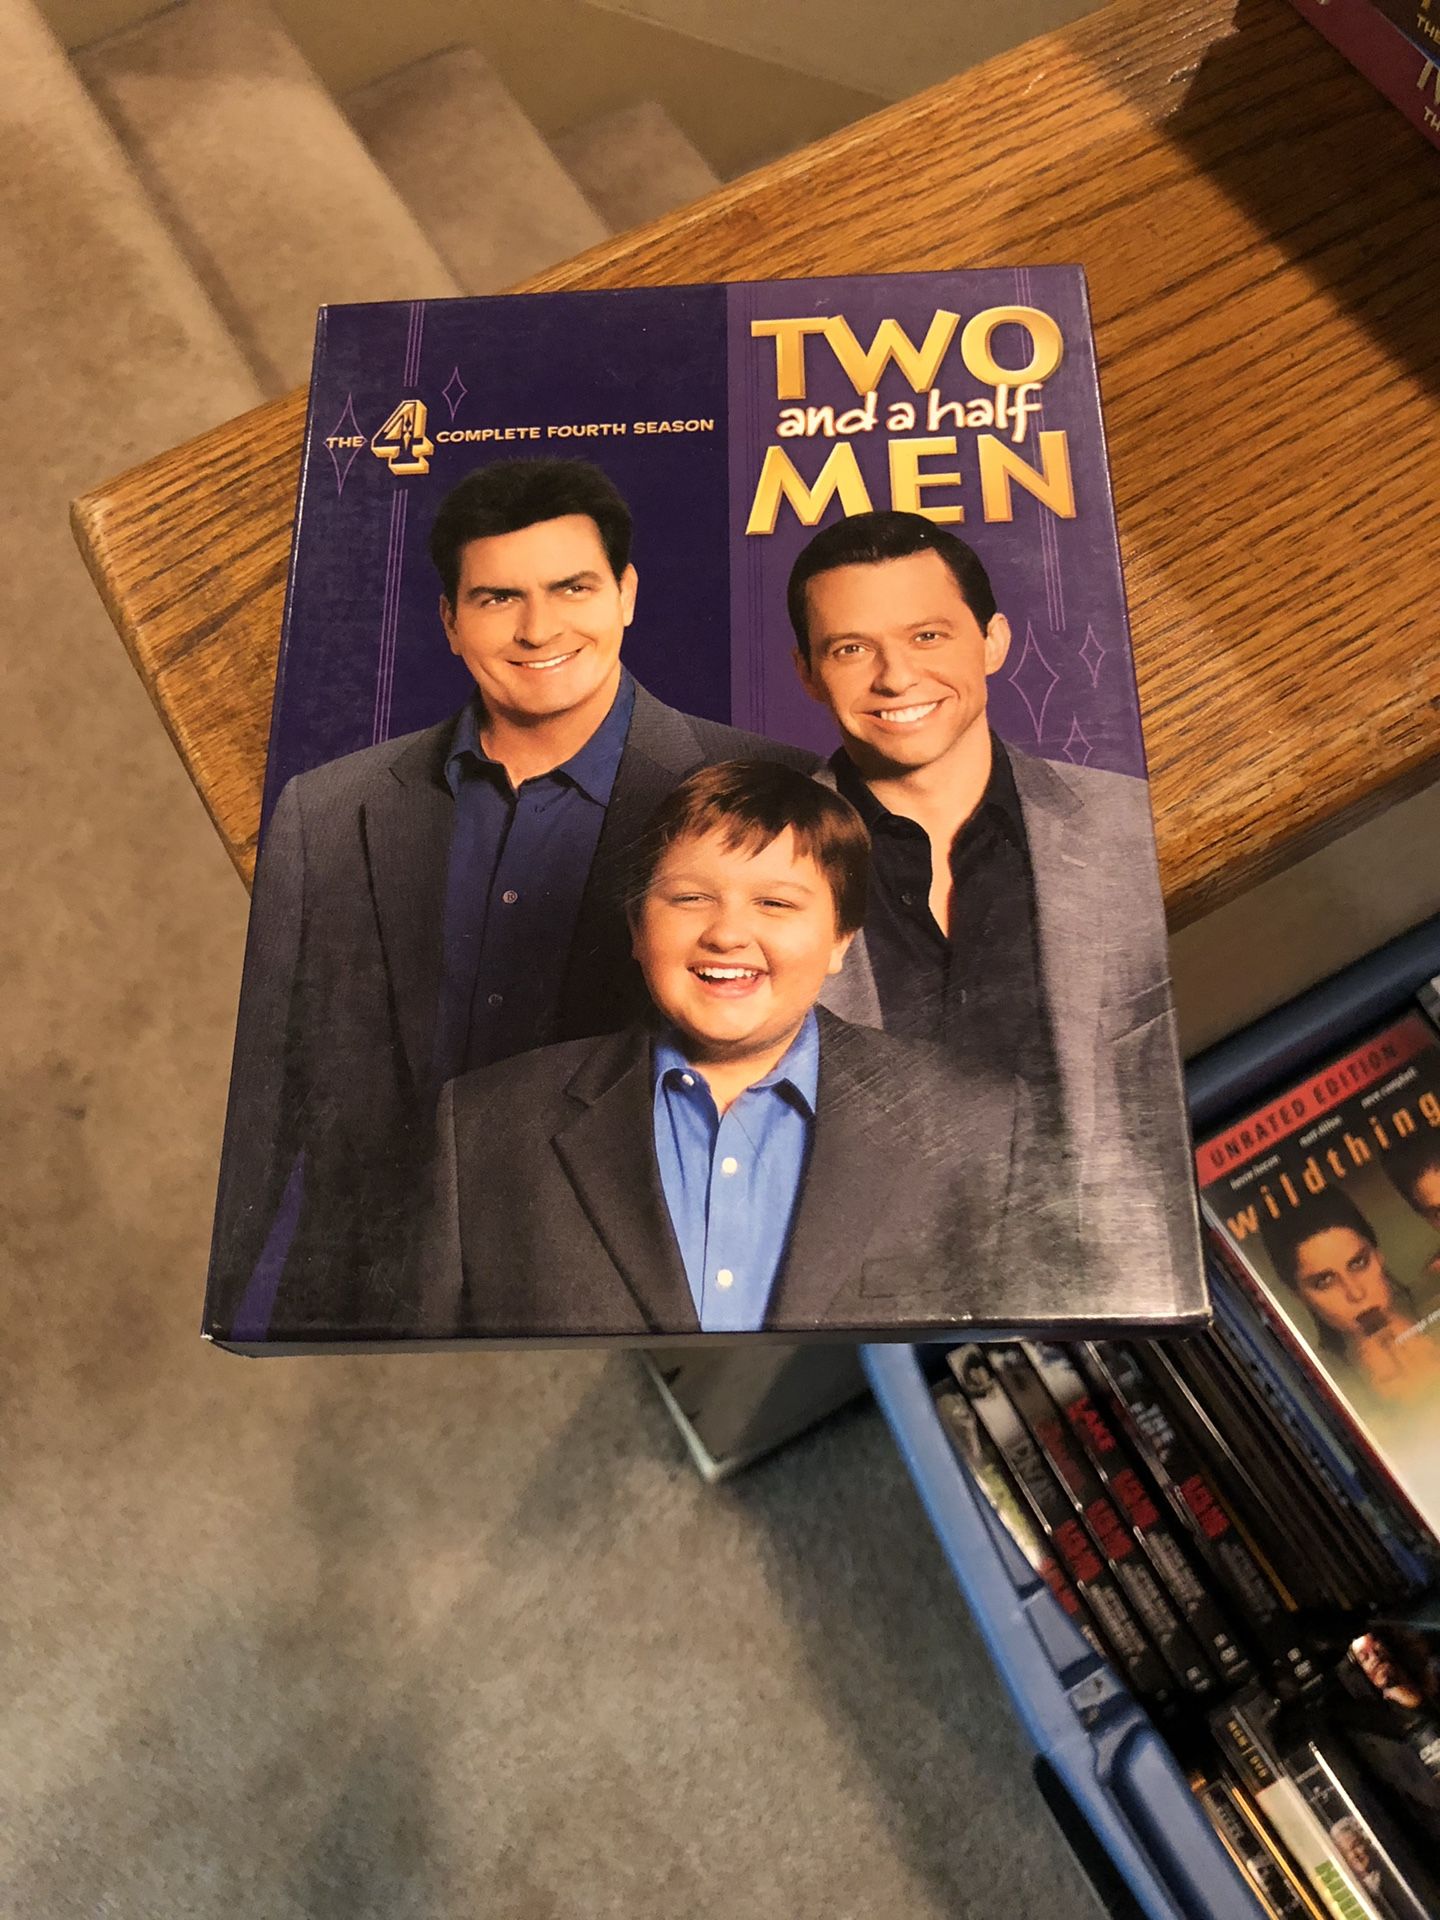 Two And A Half Men The Complete Fourth Season DVD four 4 S4 Box Set Charlie Sheen